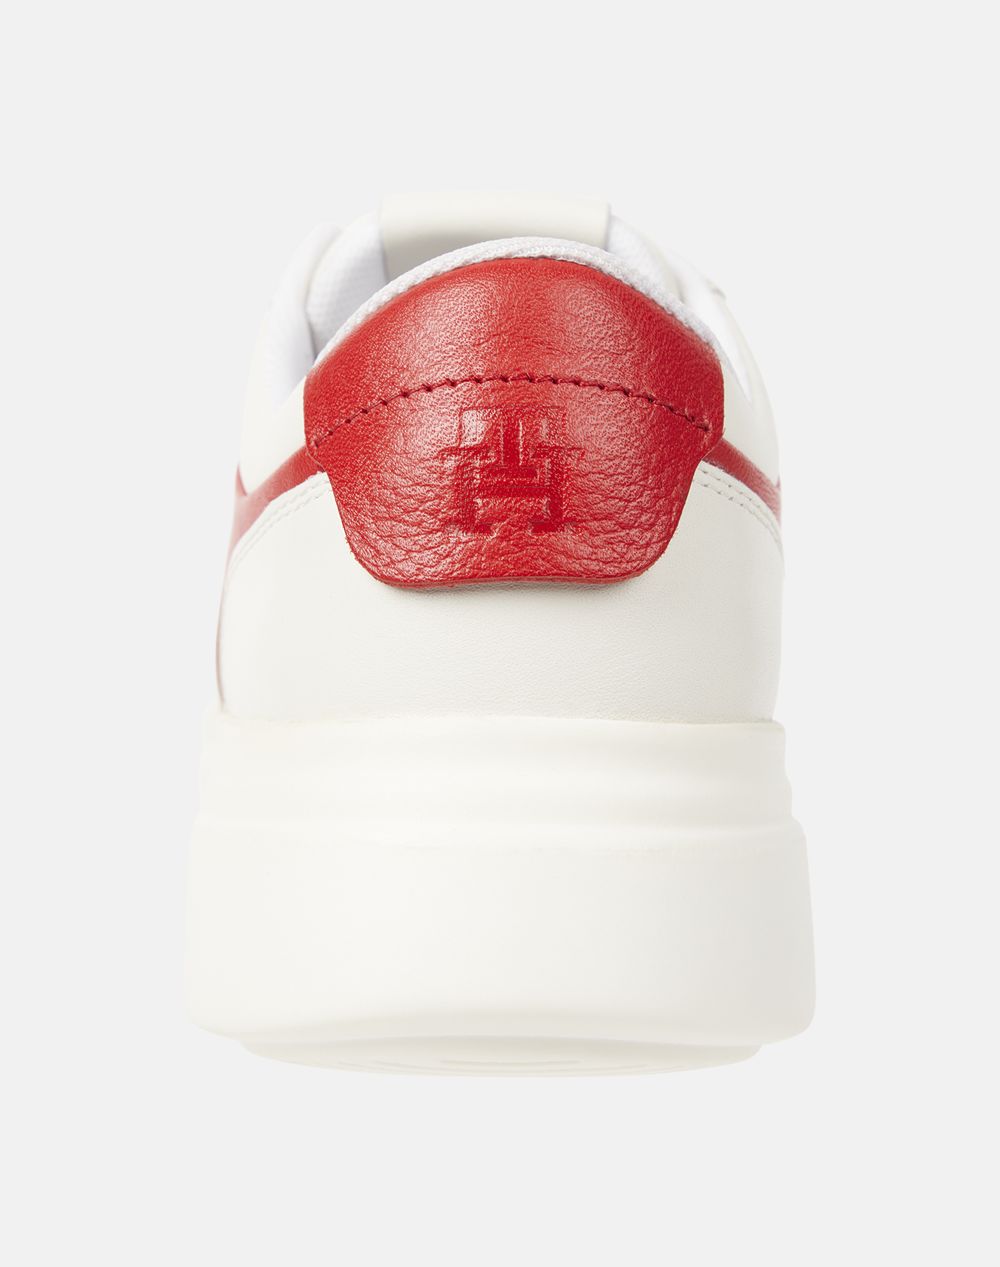 TOMMY HILFIGER POINTY COURT SNEAKER